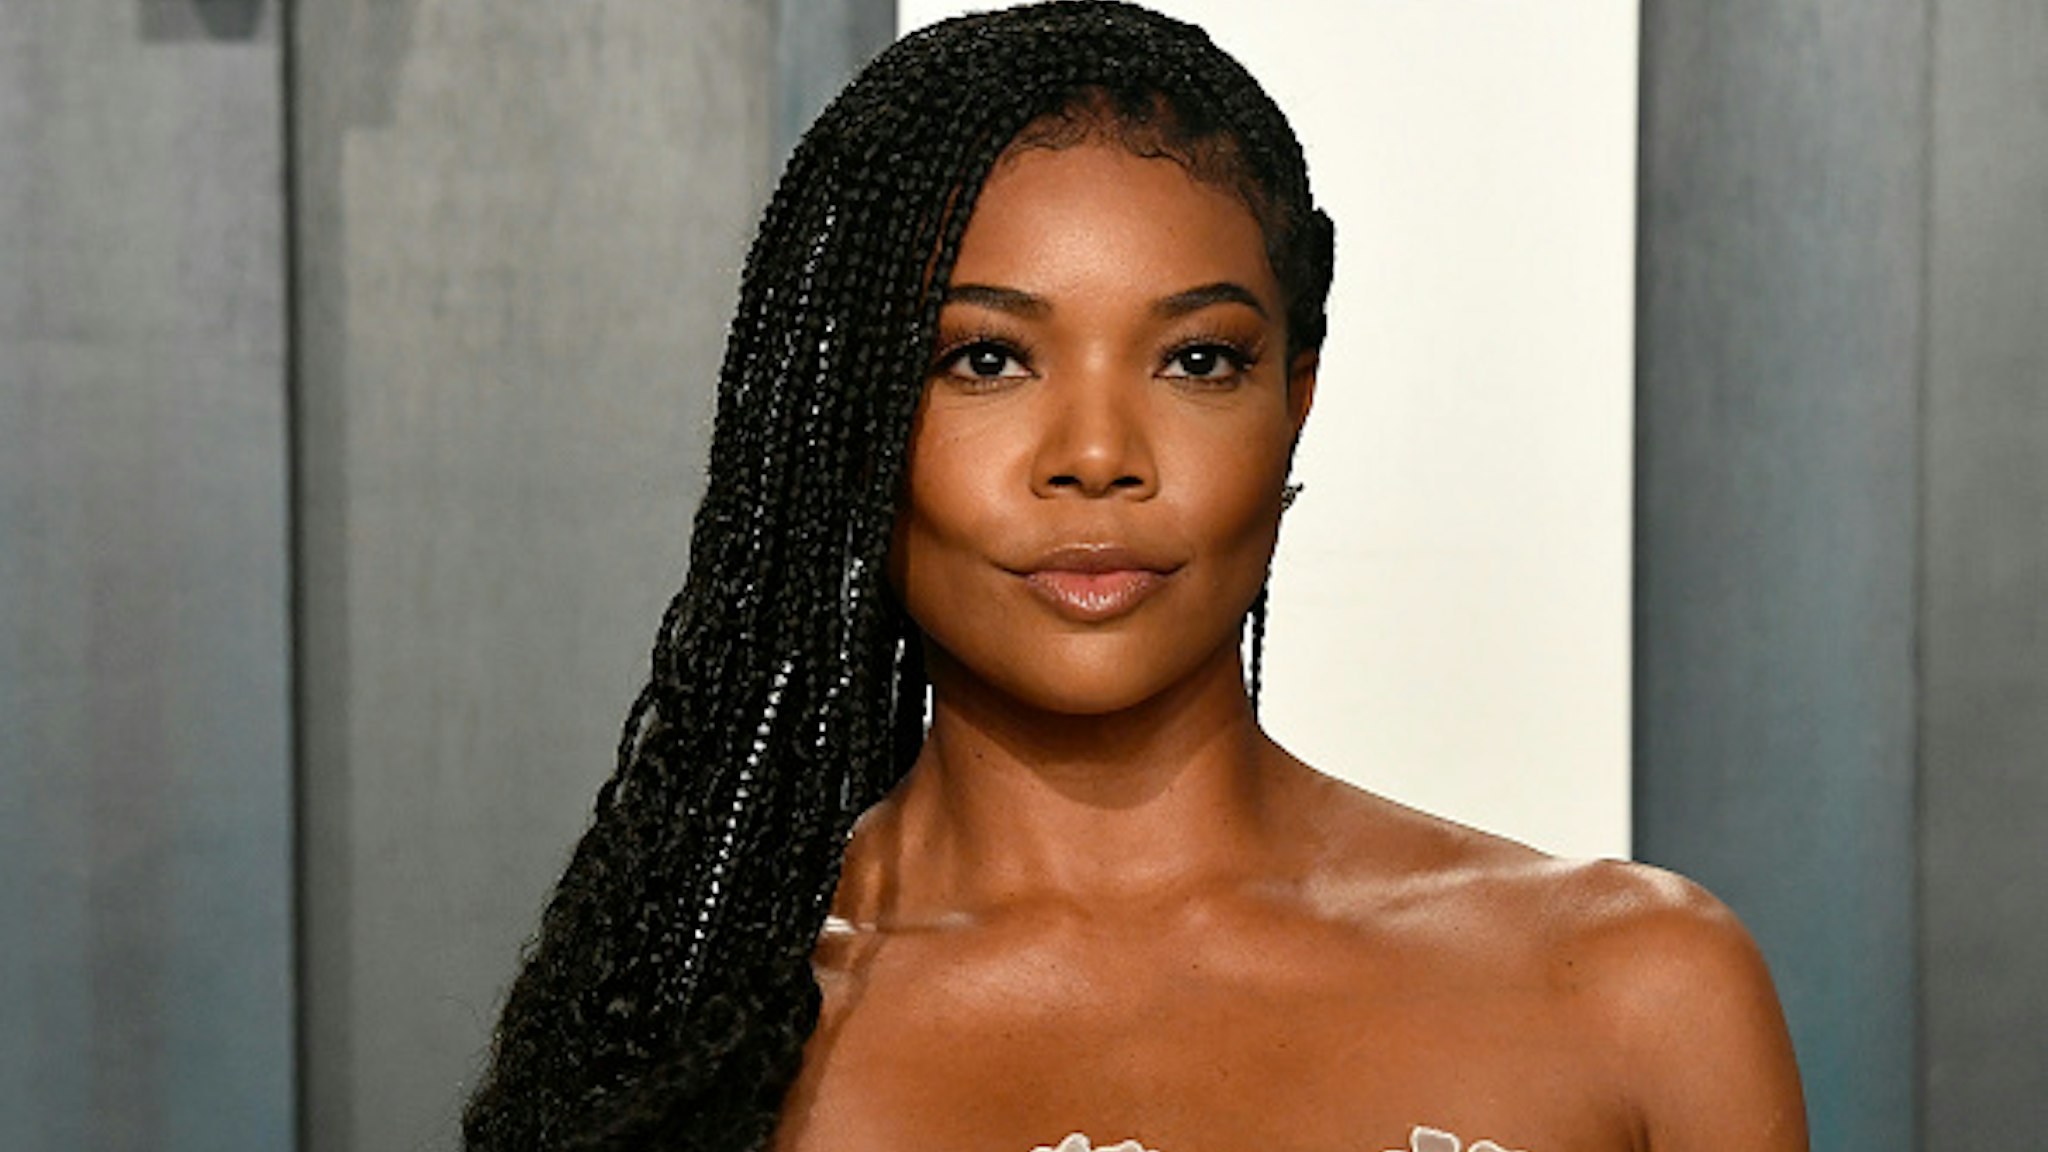 BEVERLY HILLS, CALIFORNIA - FEBRUARY 09: Gabrielle Union attends the 2020 Vanity Fair Oscar Party hosted by Radhika Jones at Wallis Annenberg Center for the Performing Arts on February 09, 2020 in Beverly Hills, California.